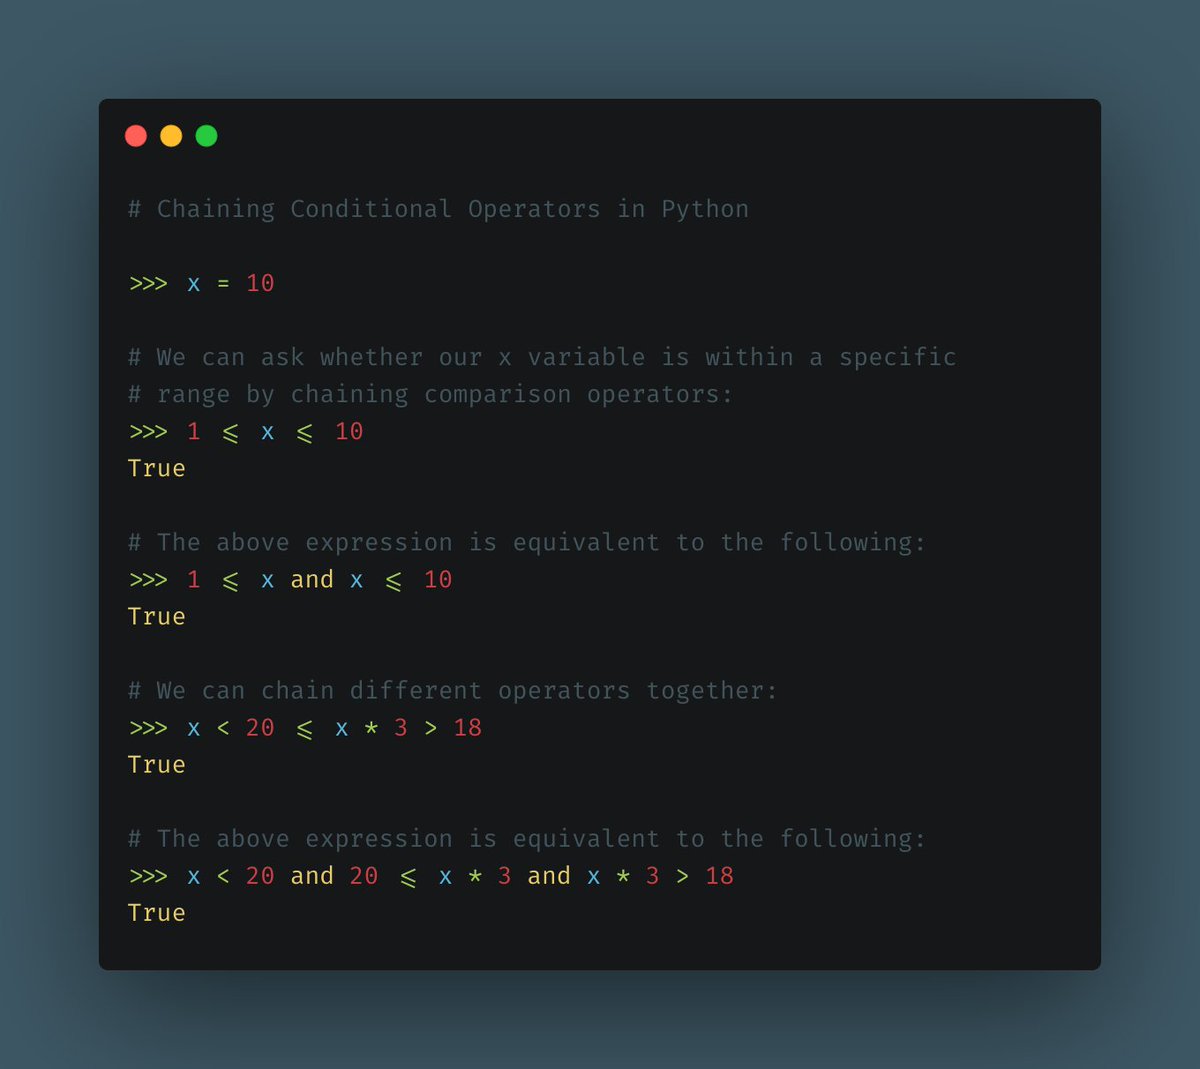 Make your conditions a little bit more readable.You can chain conditional operators in Python to make expressions look more natural. This is one of my favorites!(When evaluating them, keep in mind that all comparison operations have the same priority.)